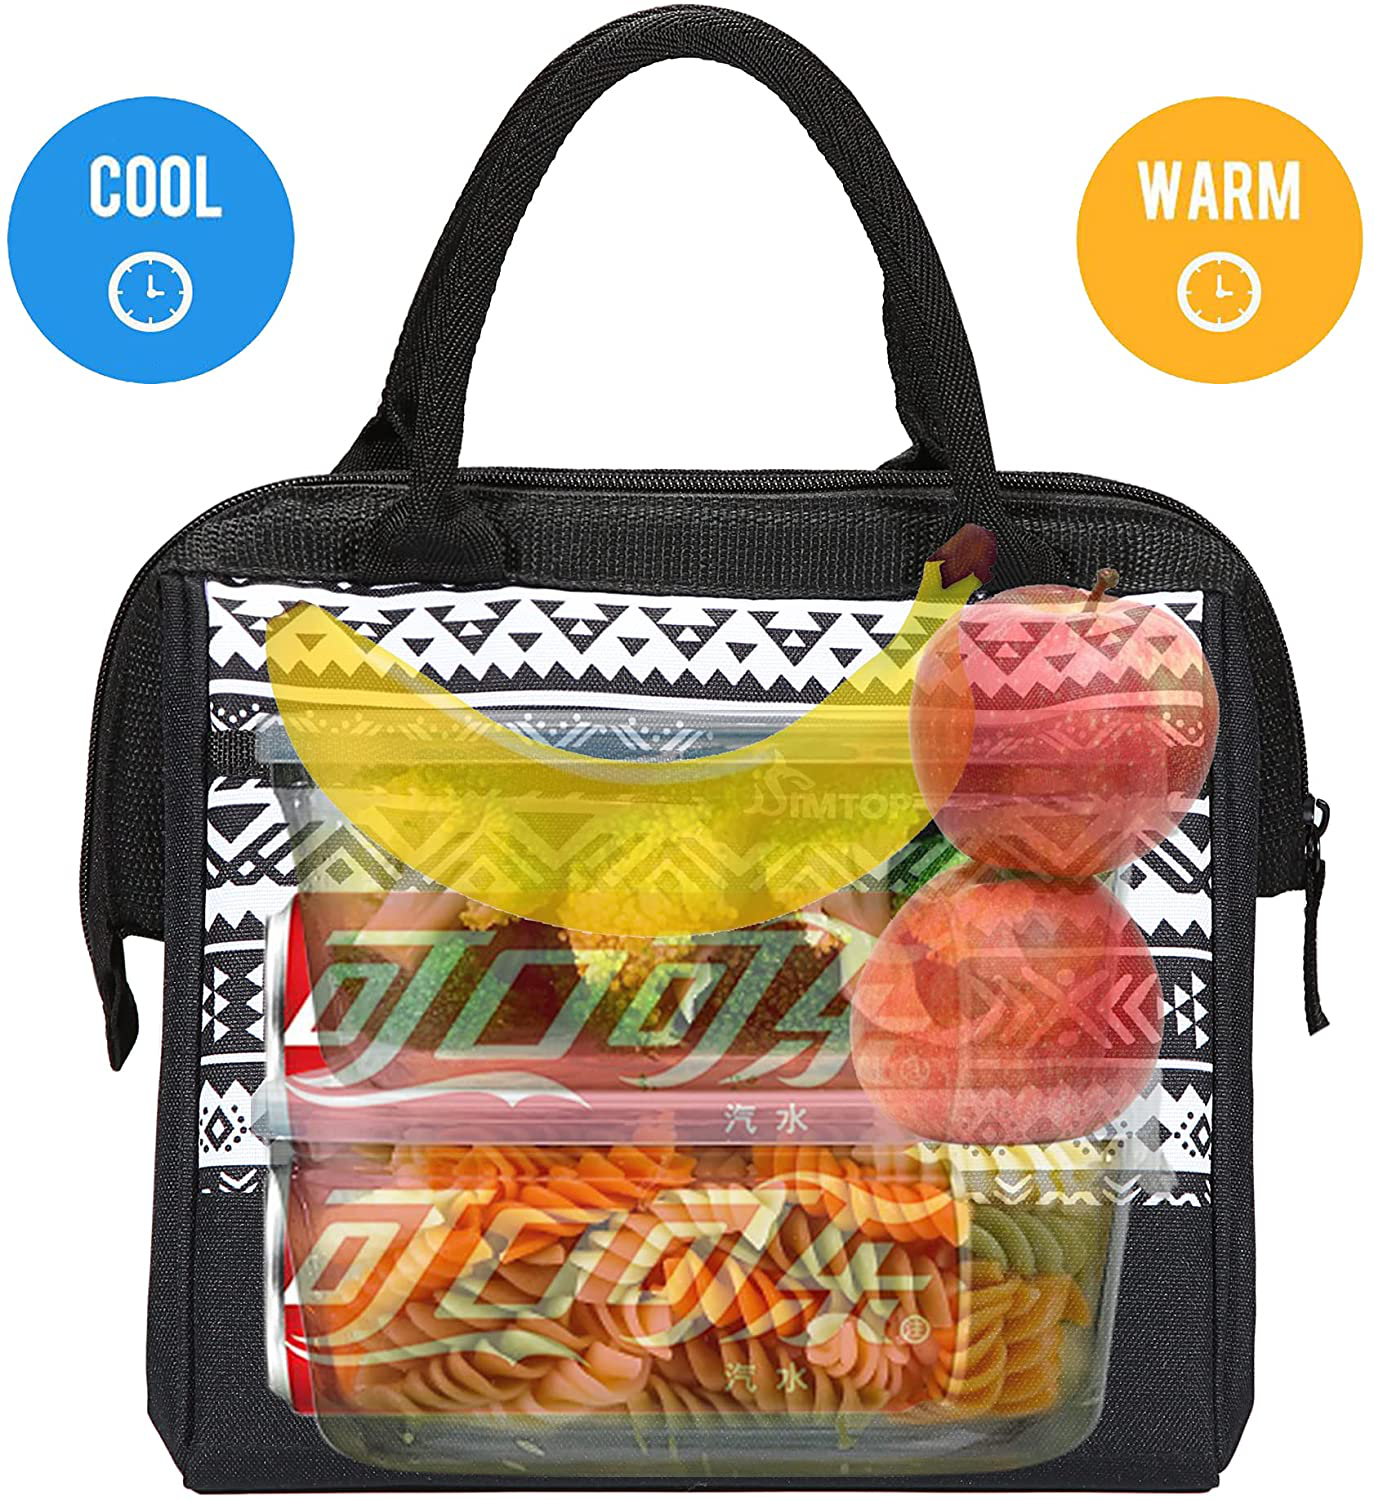 Lunch Bag, Wide-Open Insulated Cooler Lunch Box Tote Pail for Women/Men/Kids/Students, Cute Design, Leakproof, Easy Clean, Roomy Space Fit for Lunch Container Box, Utensils, Snacks, Drinks, Fruits